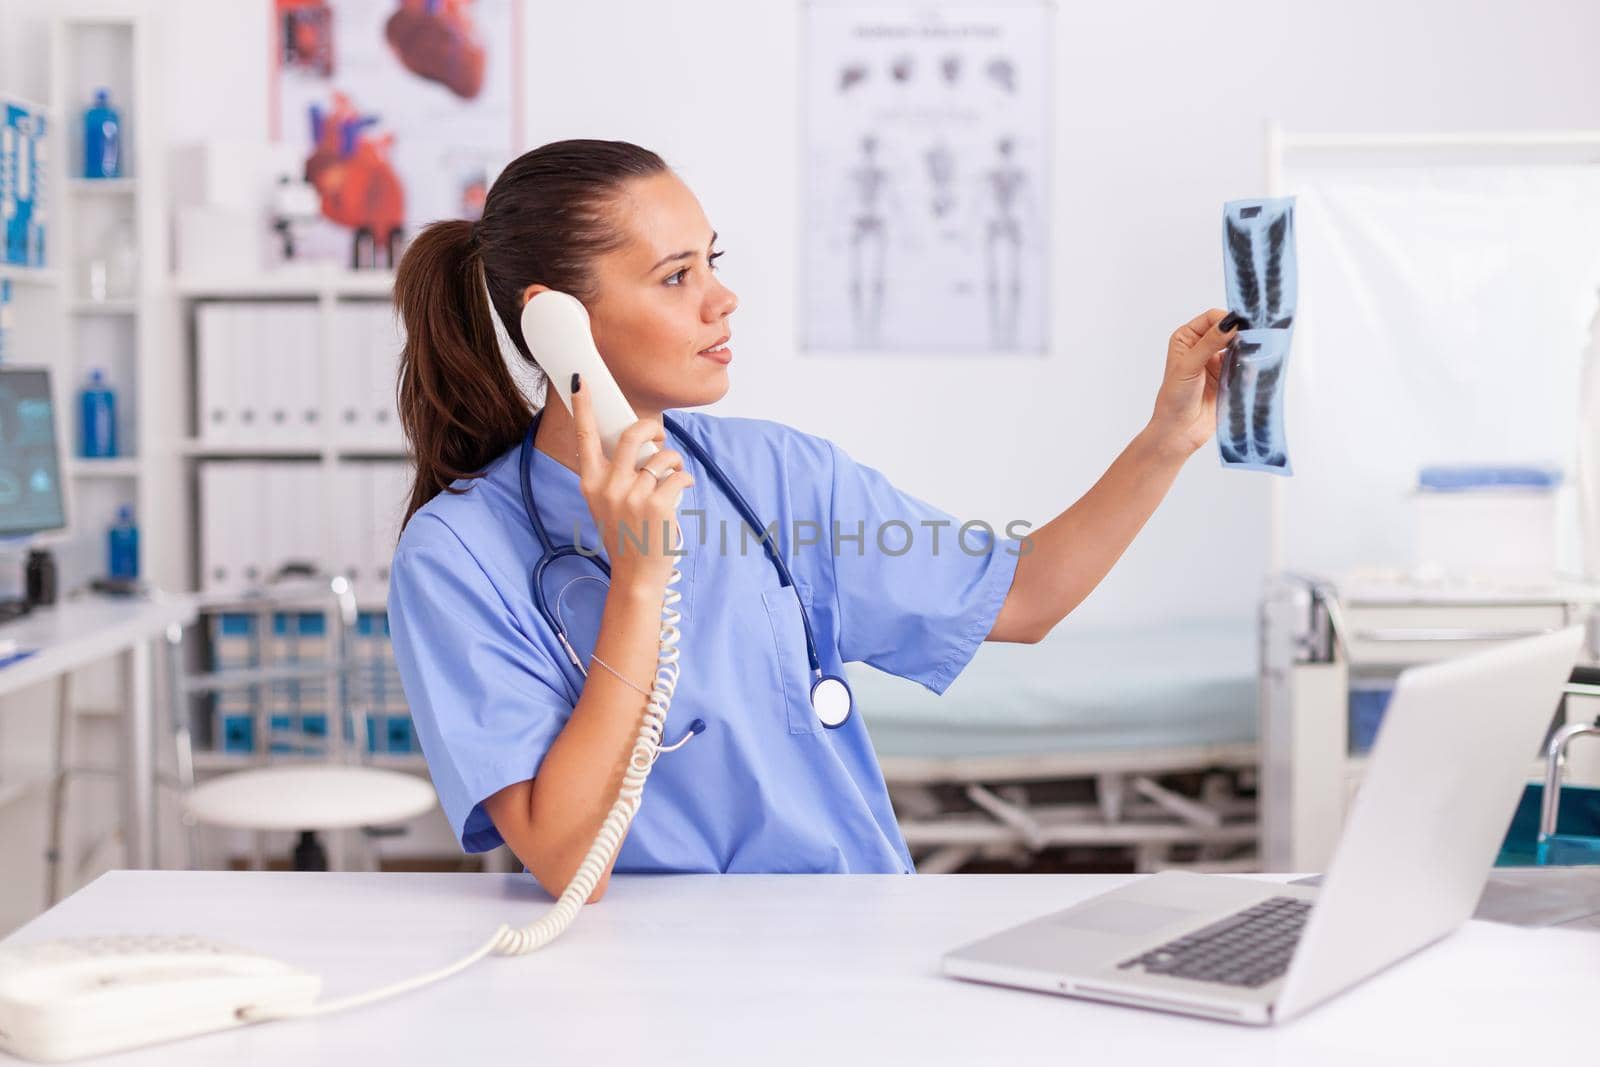 Medical nurse holding patient radiography by DCStudio